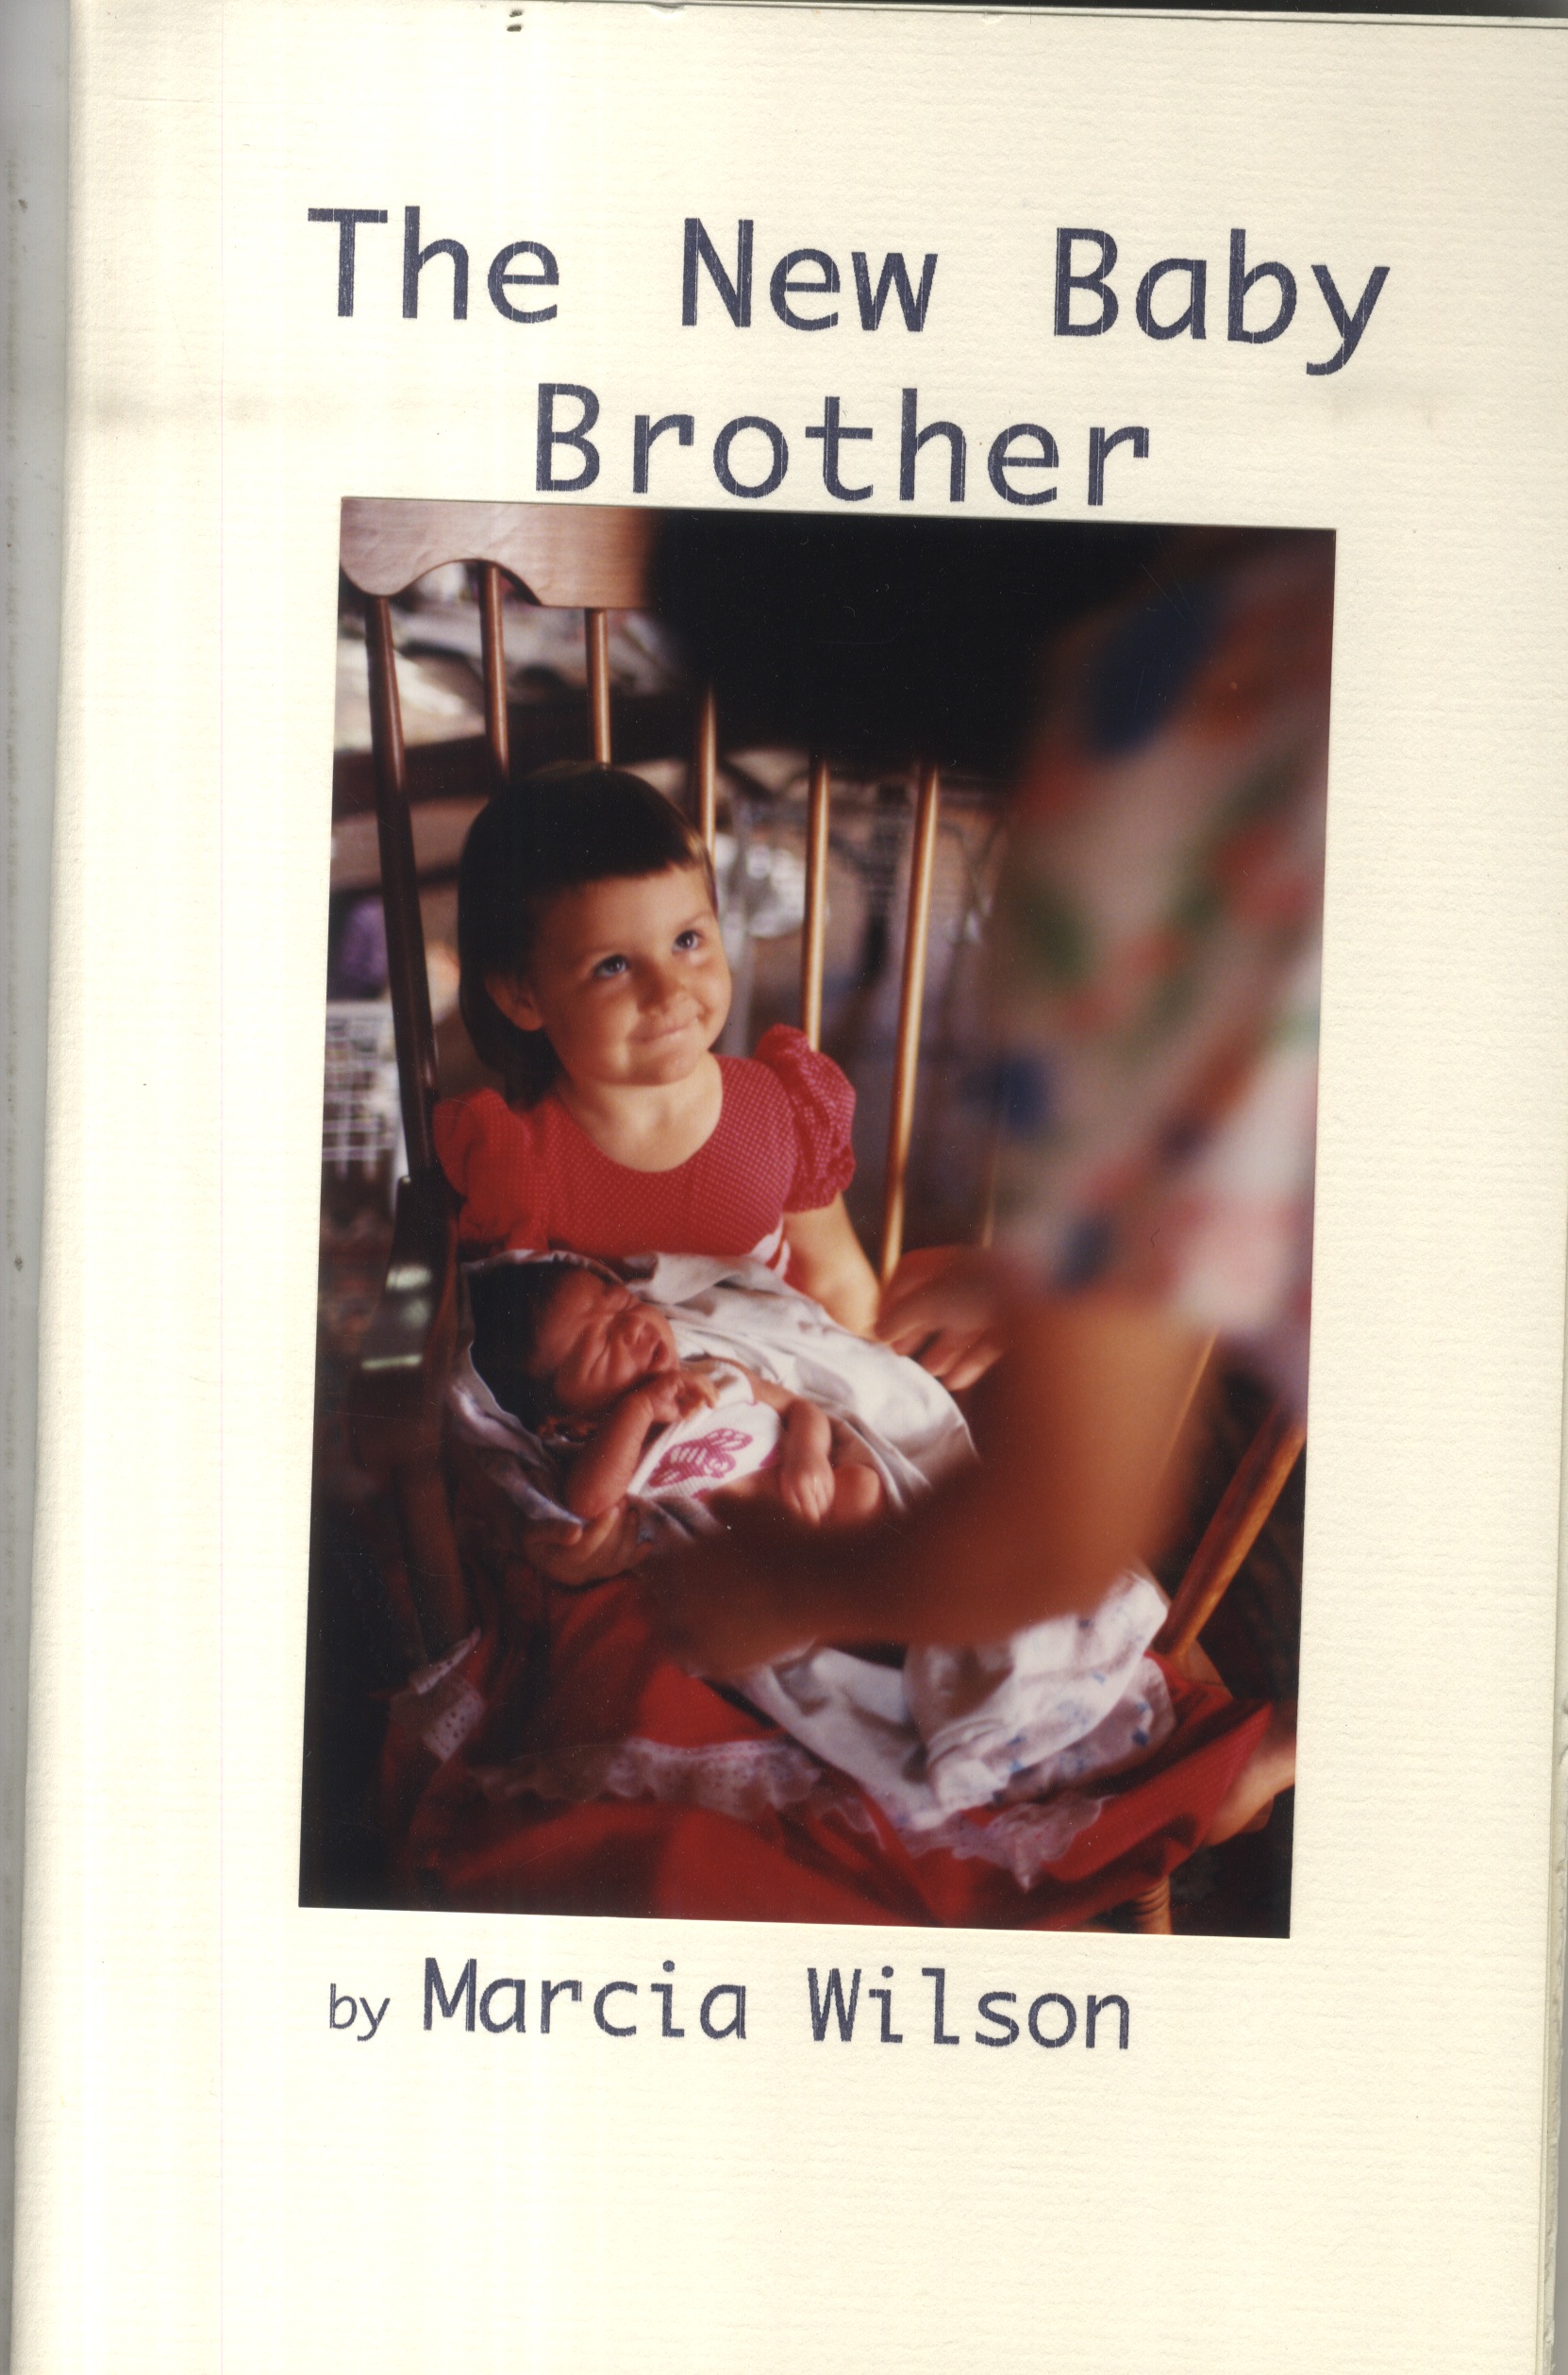 Cover of The new baby brother by Marcia Sandmeyer Wilson